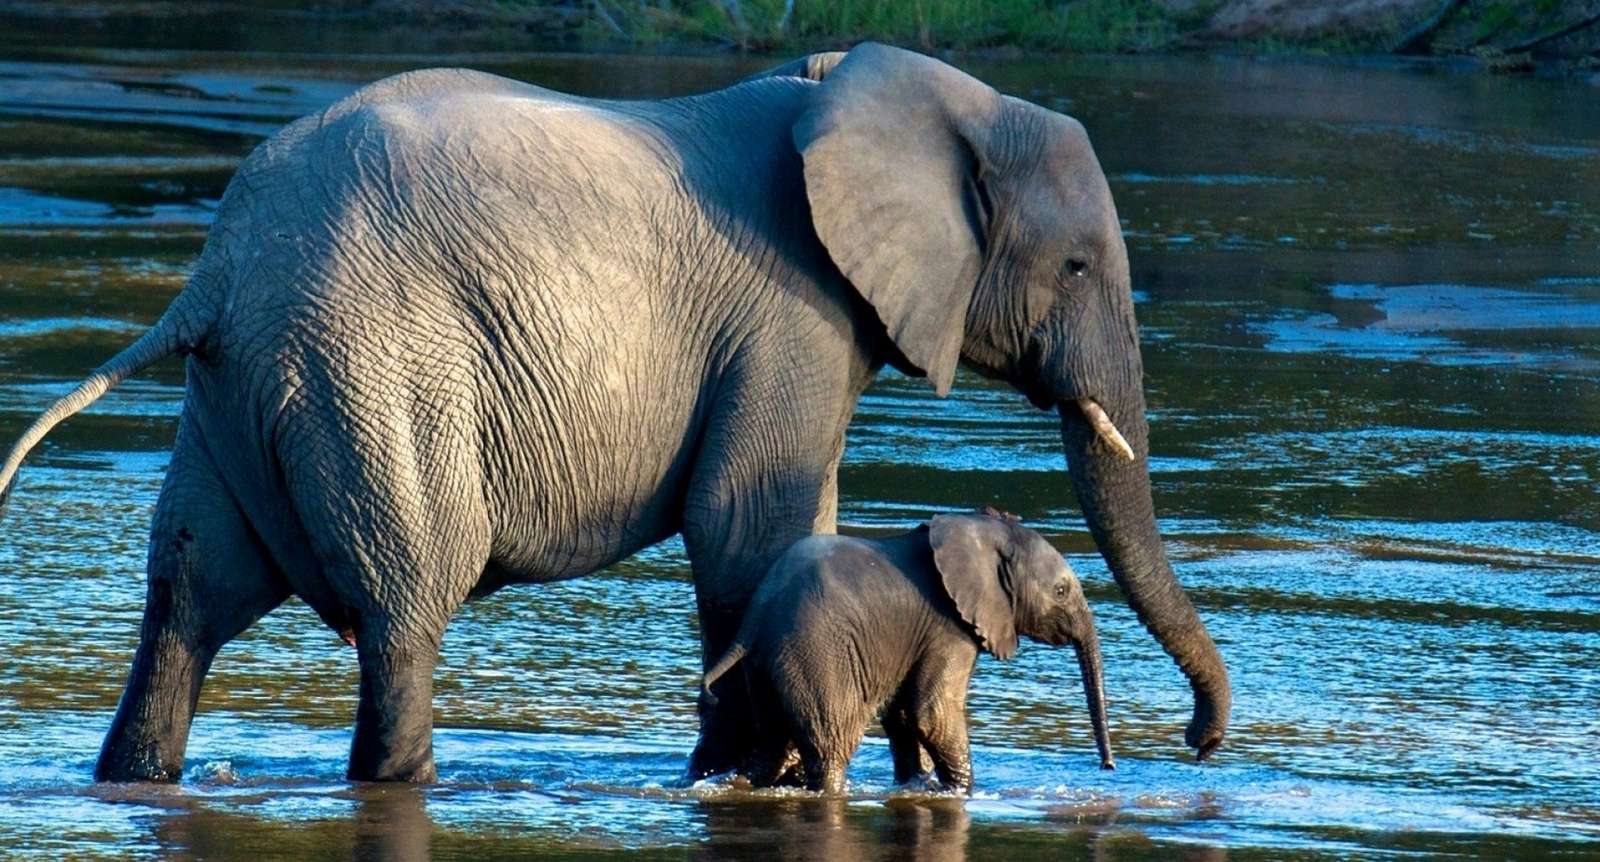 Small baby elephant online puzzle